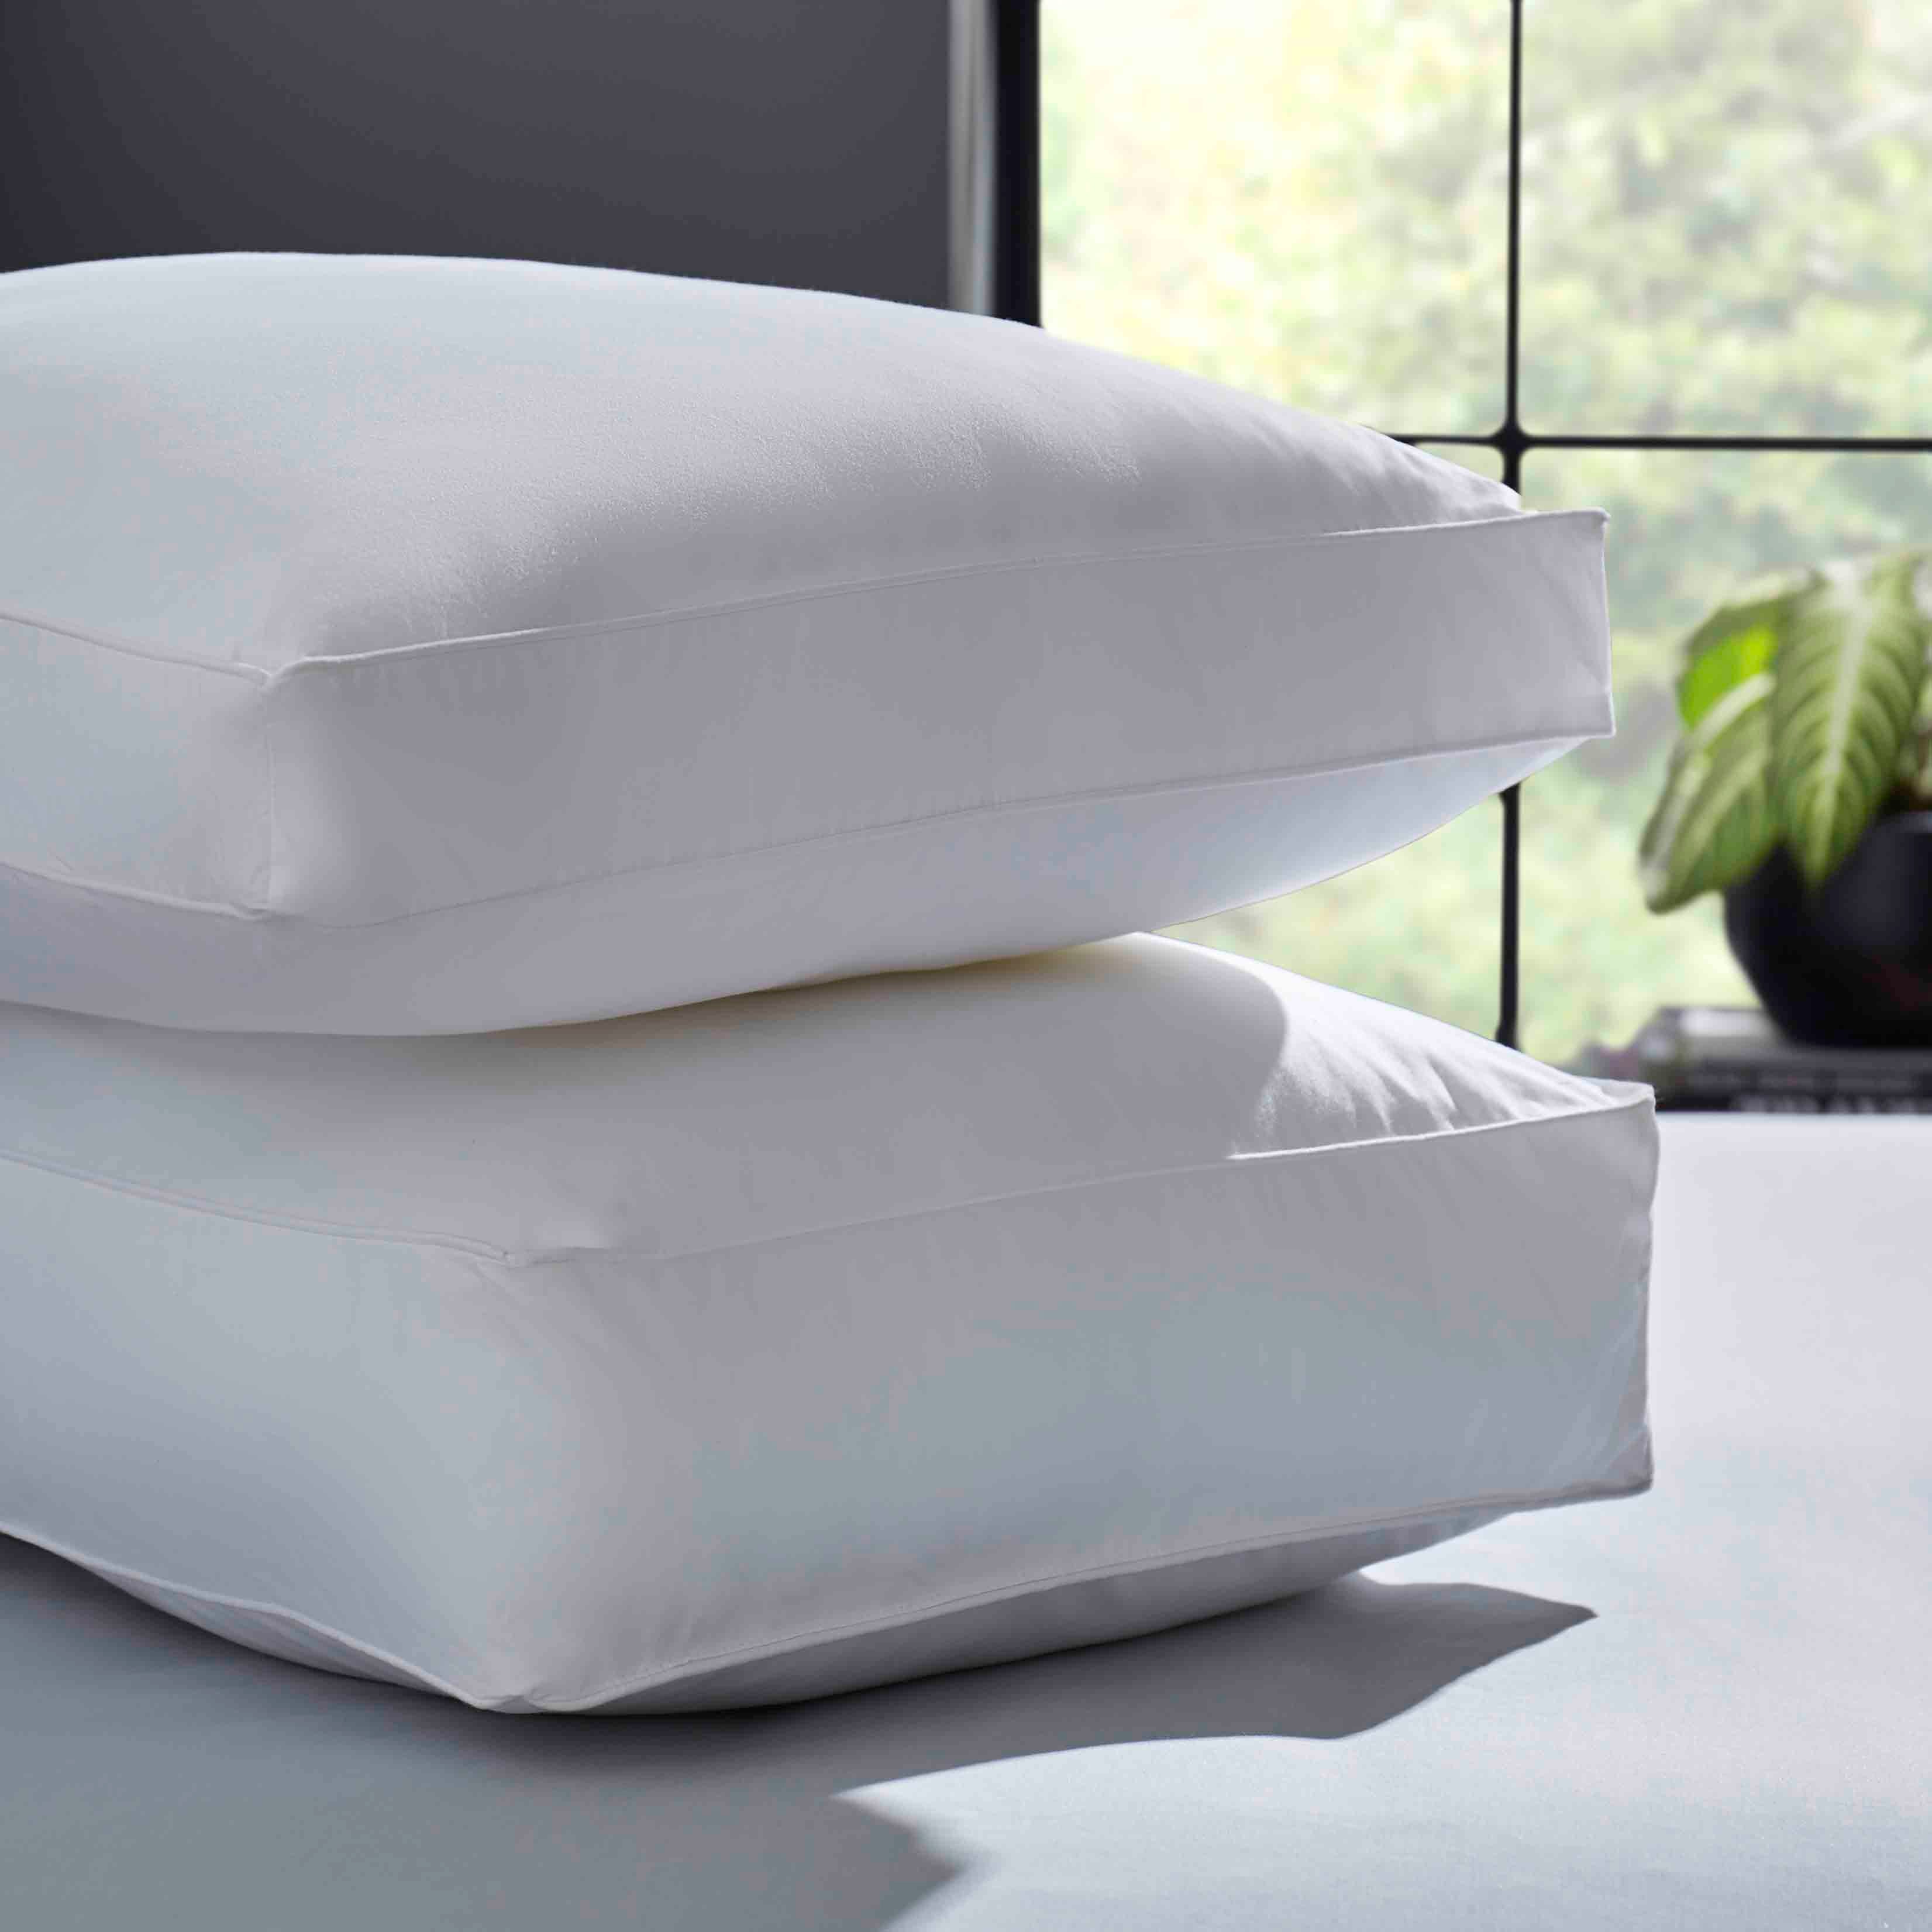 The Fine Bedding Company Side Sleeper Pillow 2 Shaws Department Stores